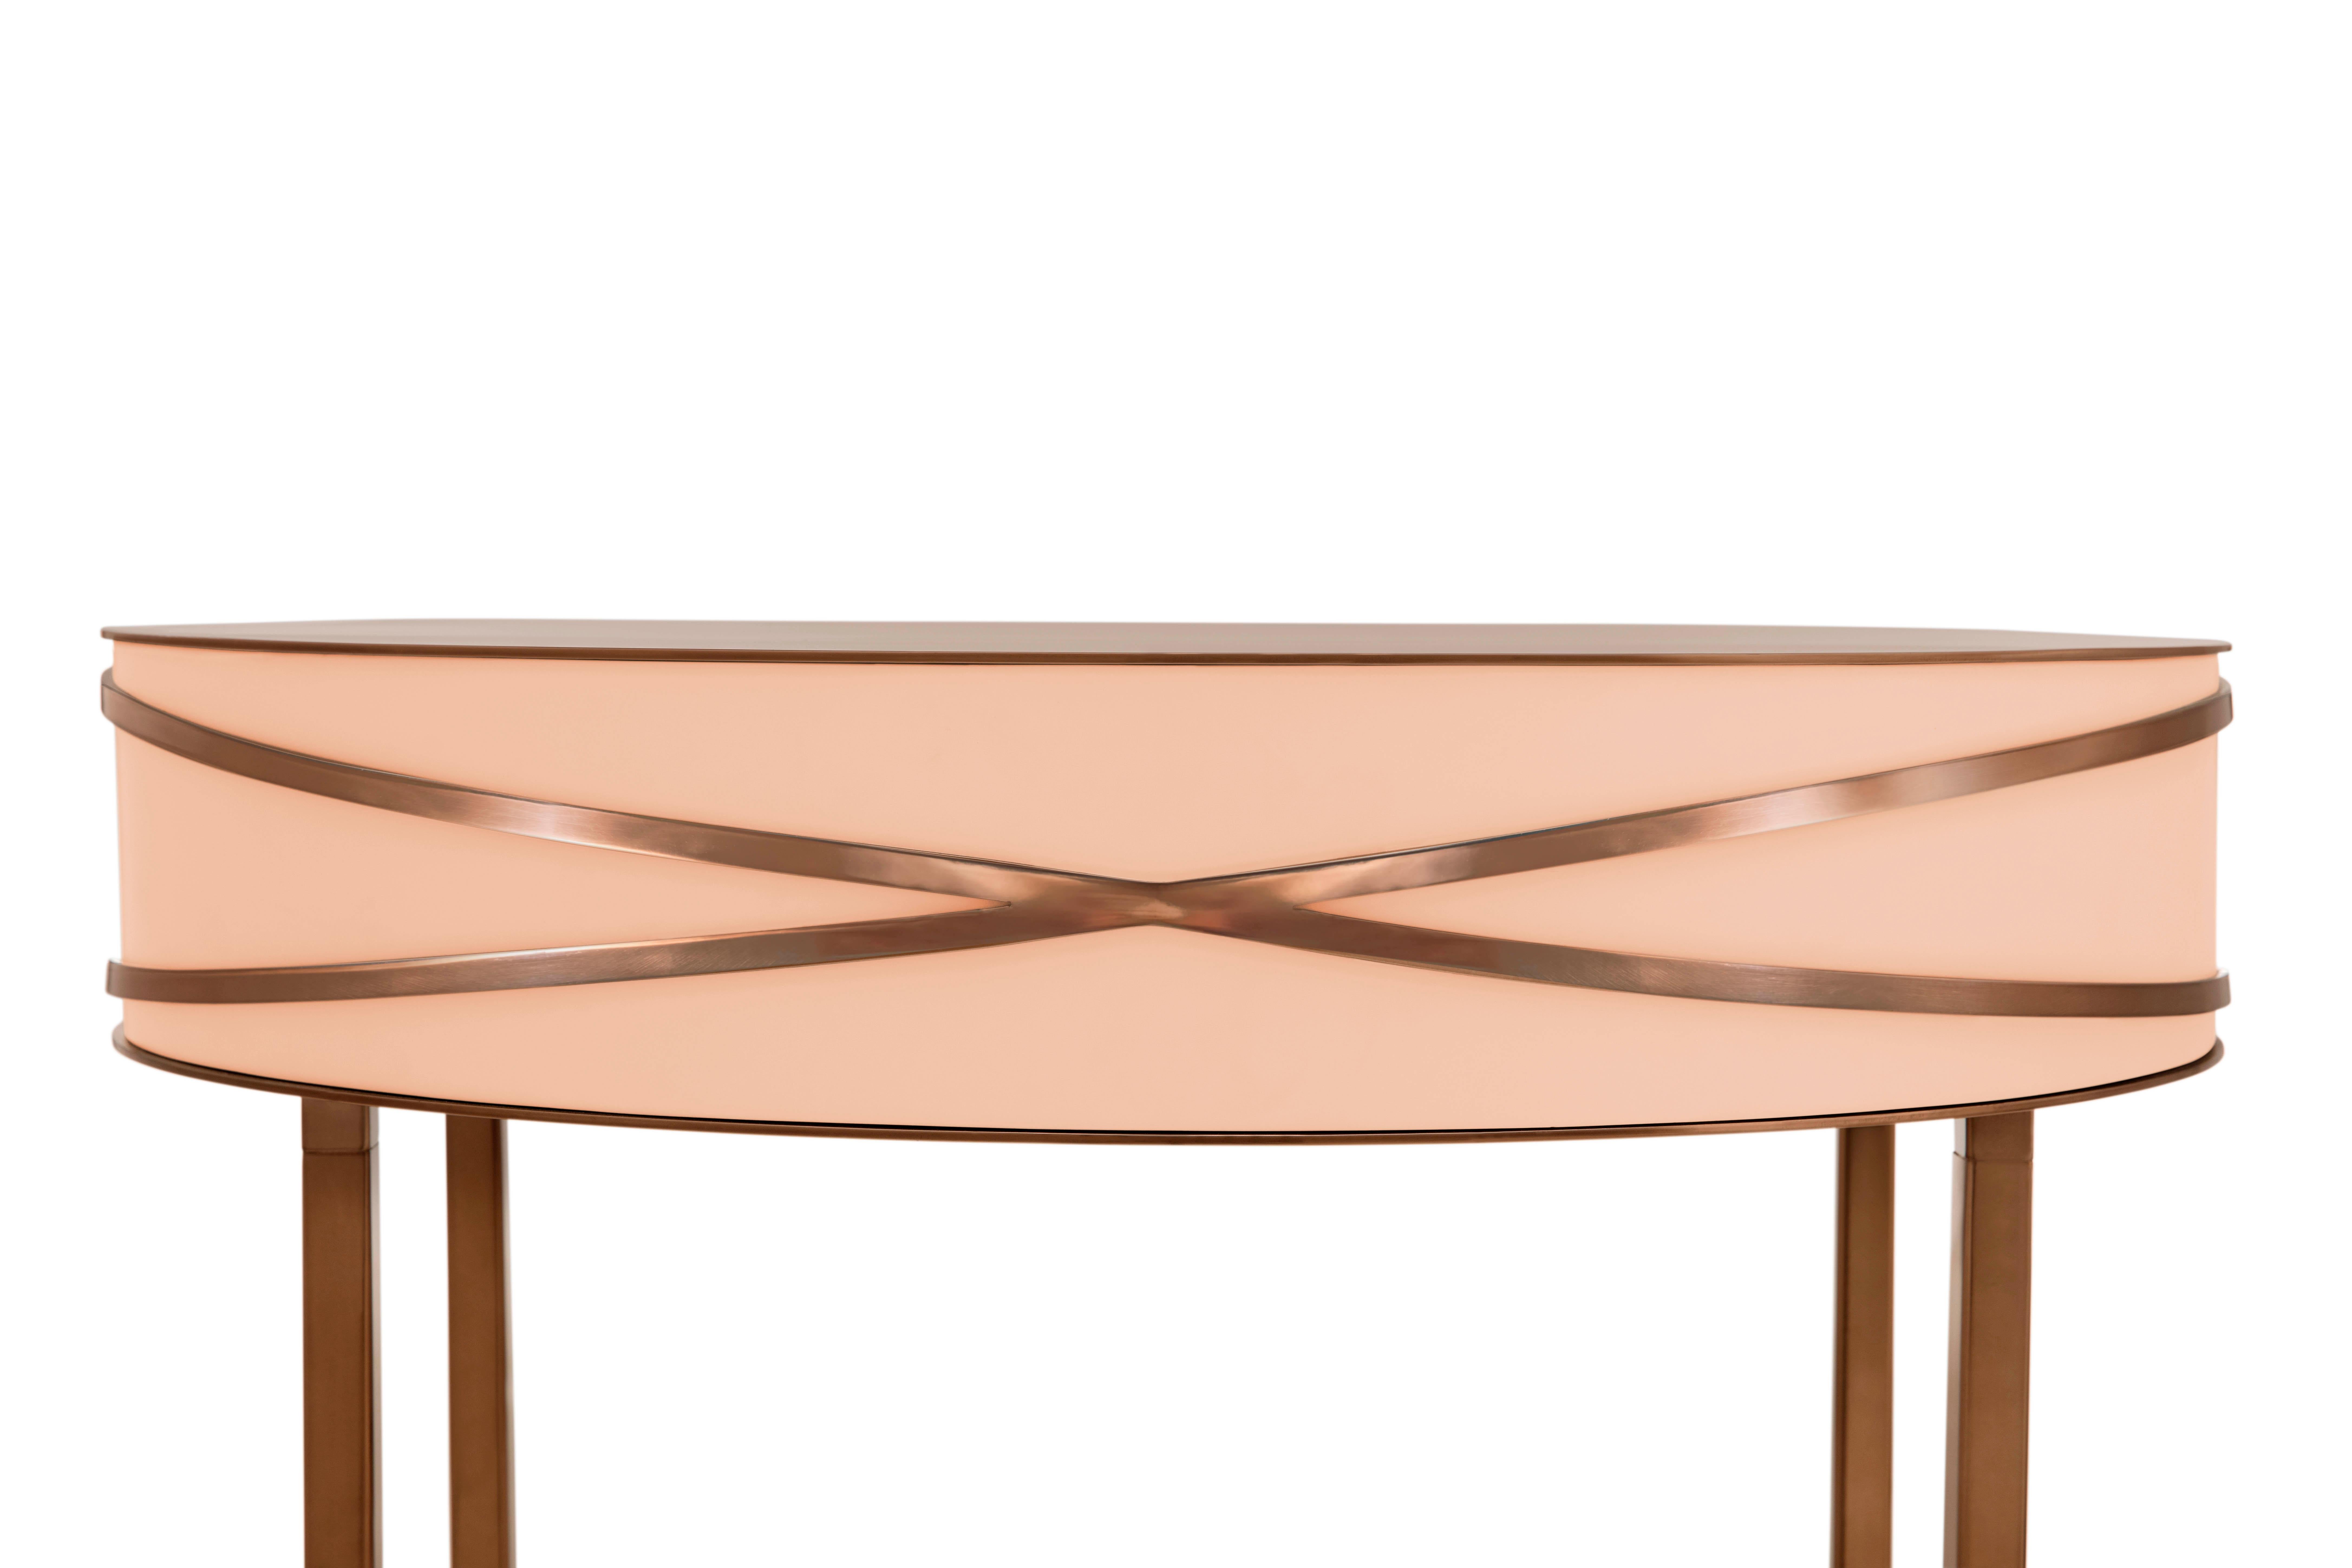 Stella Pink Console or Bedside Table with Rose Gold Trims by Nika Zupanc is a pink console table with a drawer, and metal trims in rose gold.

Nika Zupanc, a strikingly renowned Slovenian designer, never shies away from redefining the status quo of